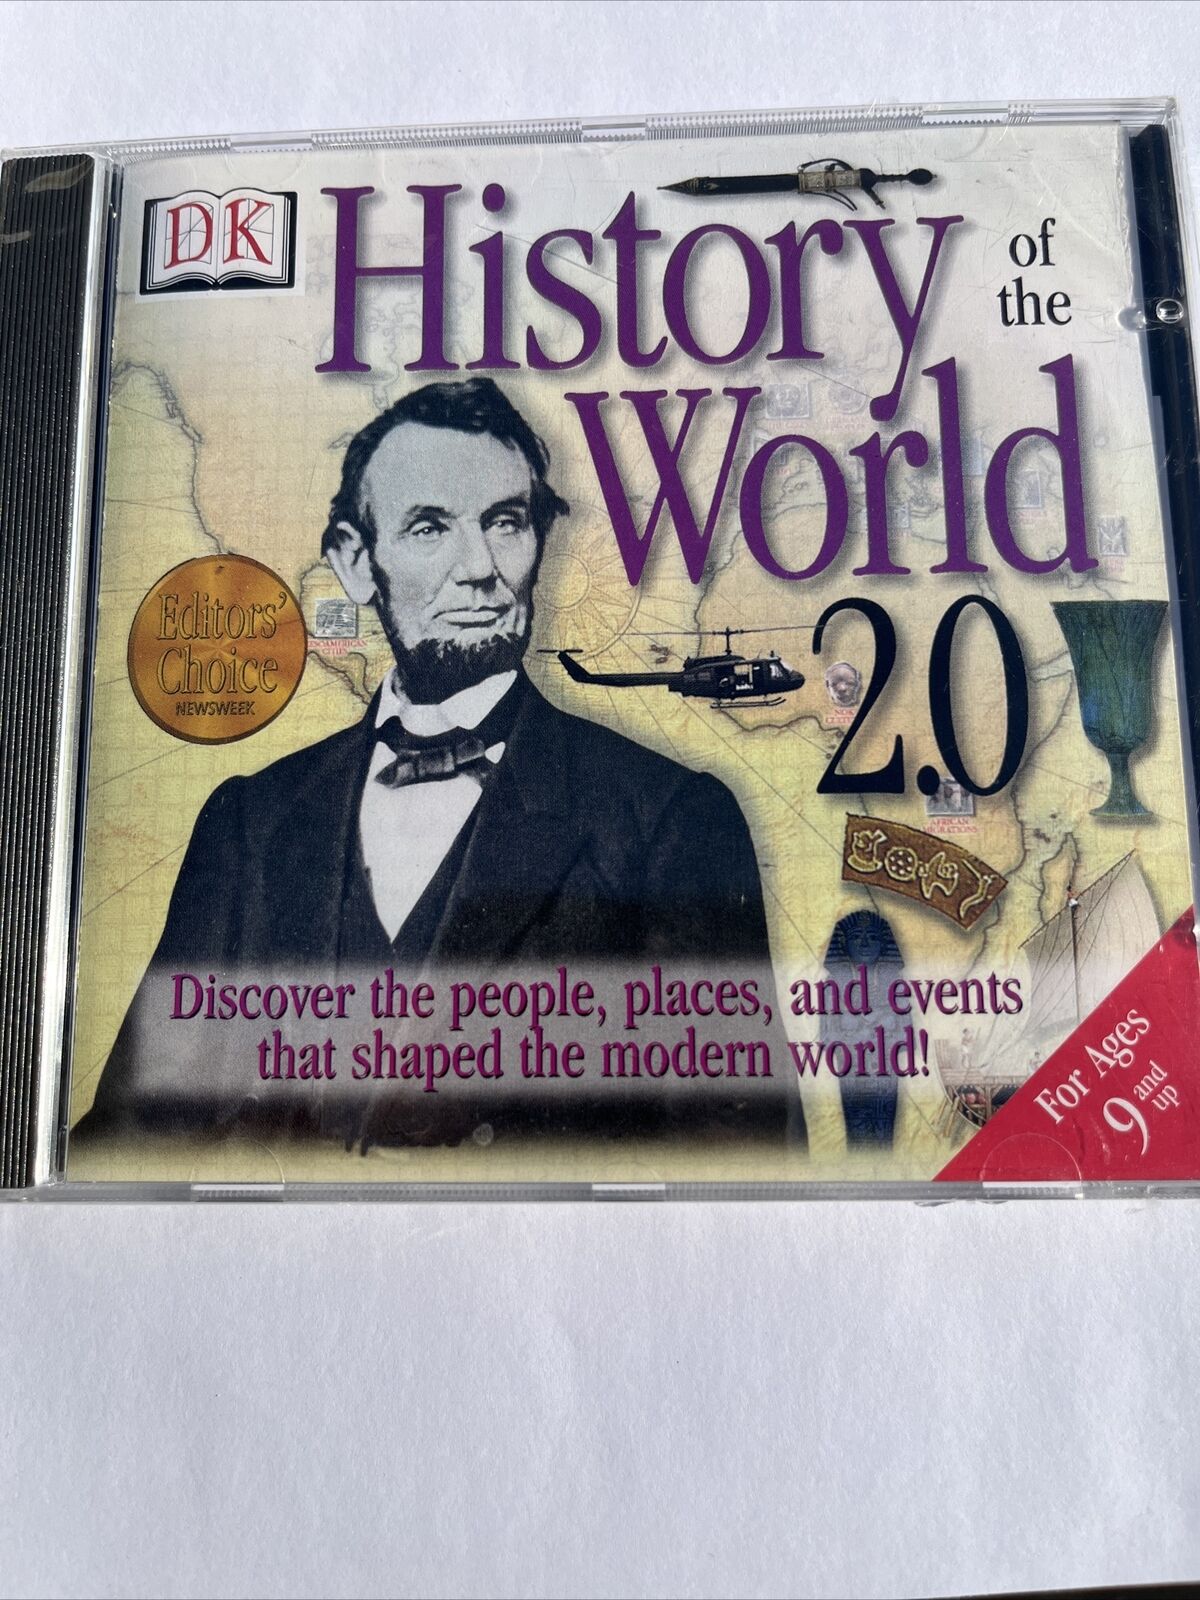 DK History of the World 2.0, for ages 9 and up, Interactive Learning